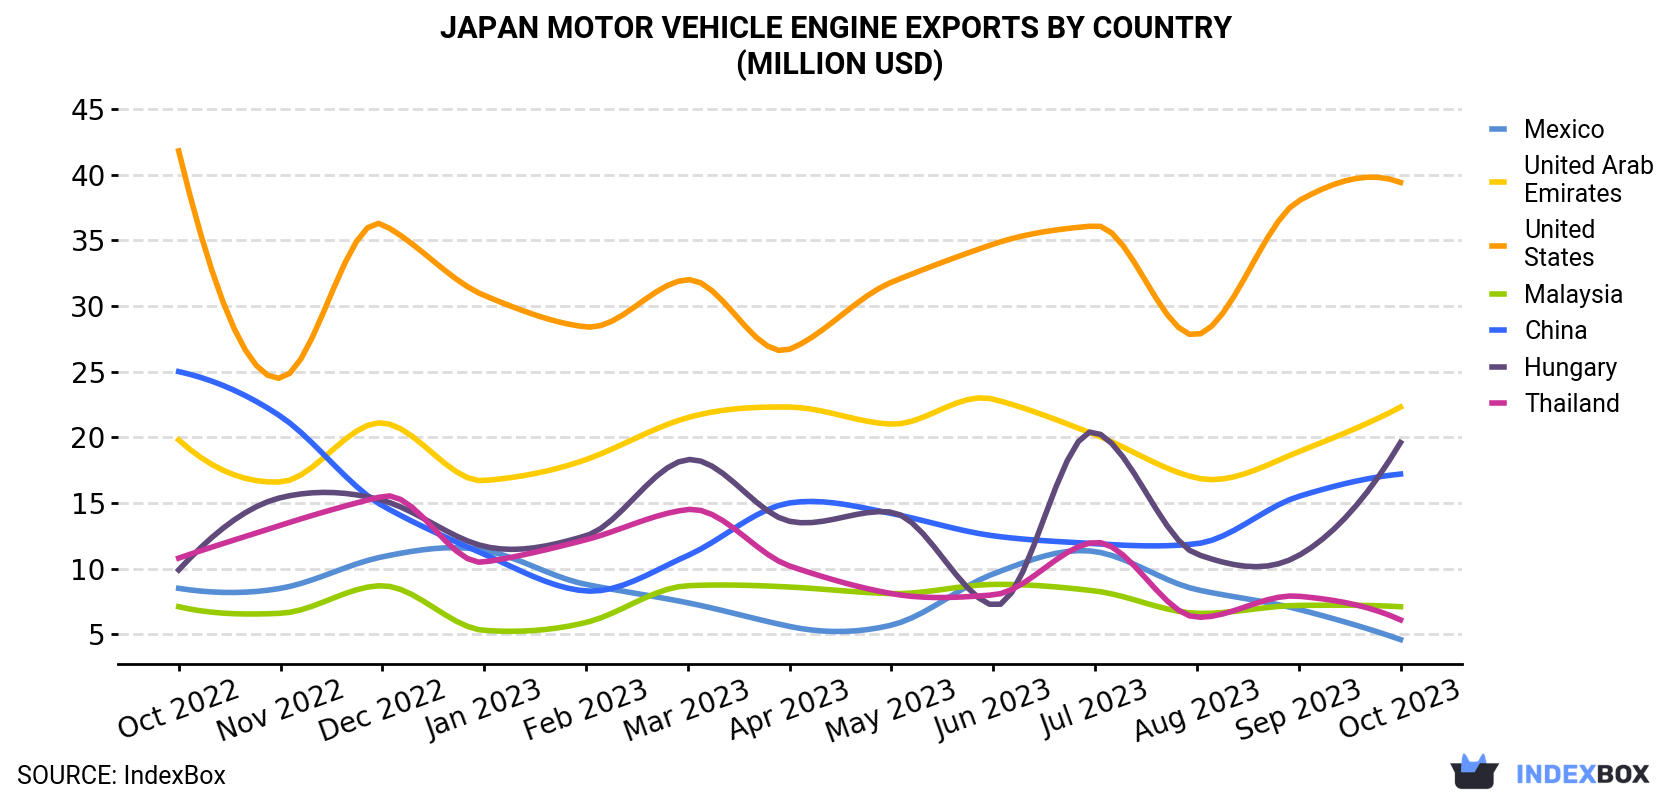 October 2023 Sees Japan's Motor Vehicle Engine Exports Surge to $169M ...